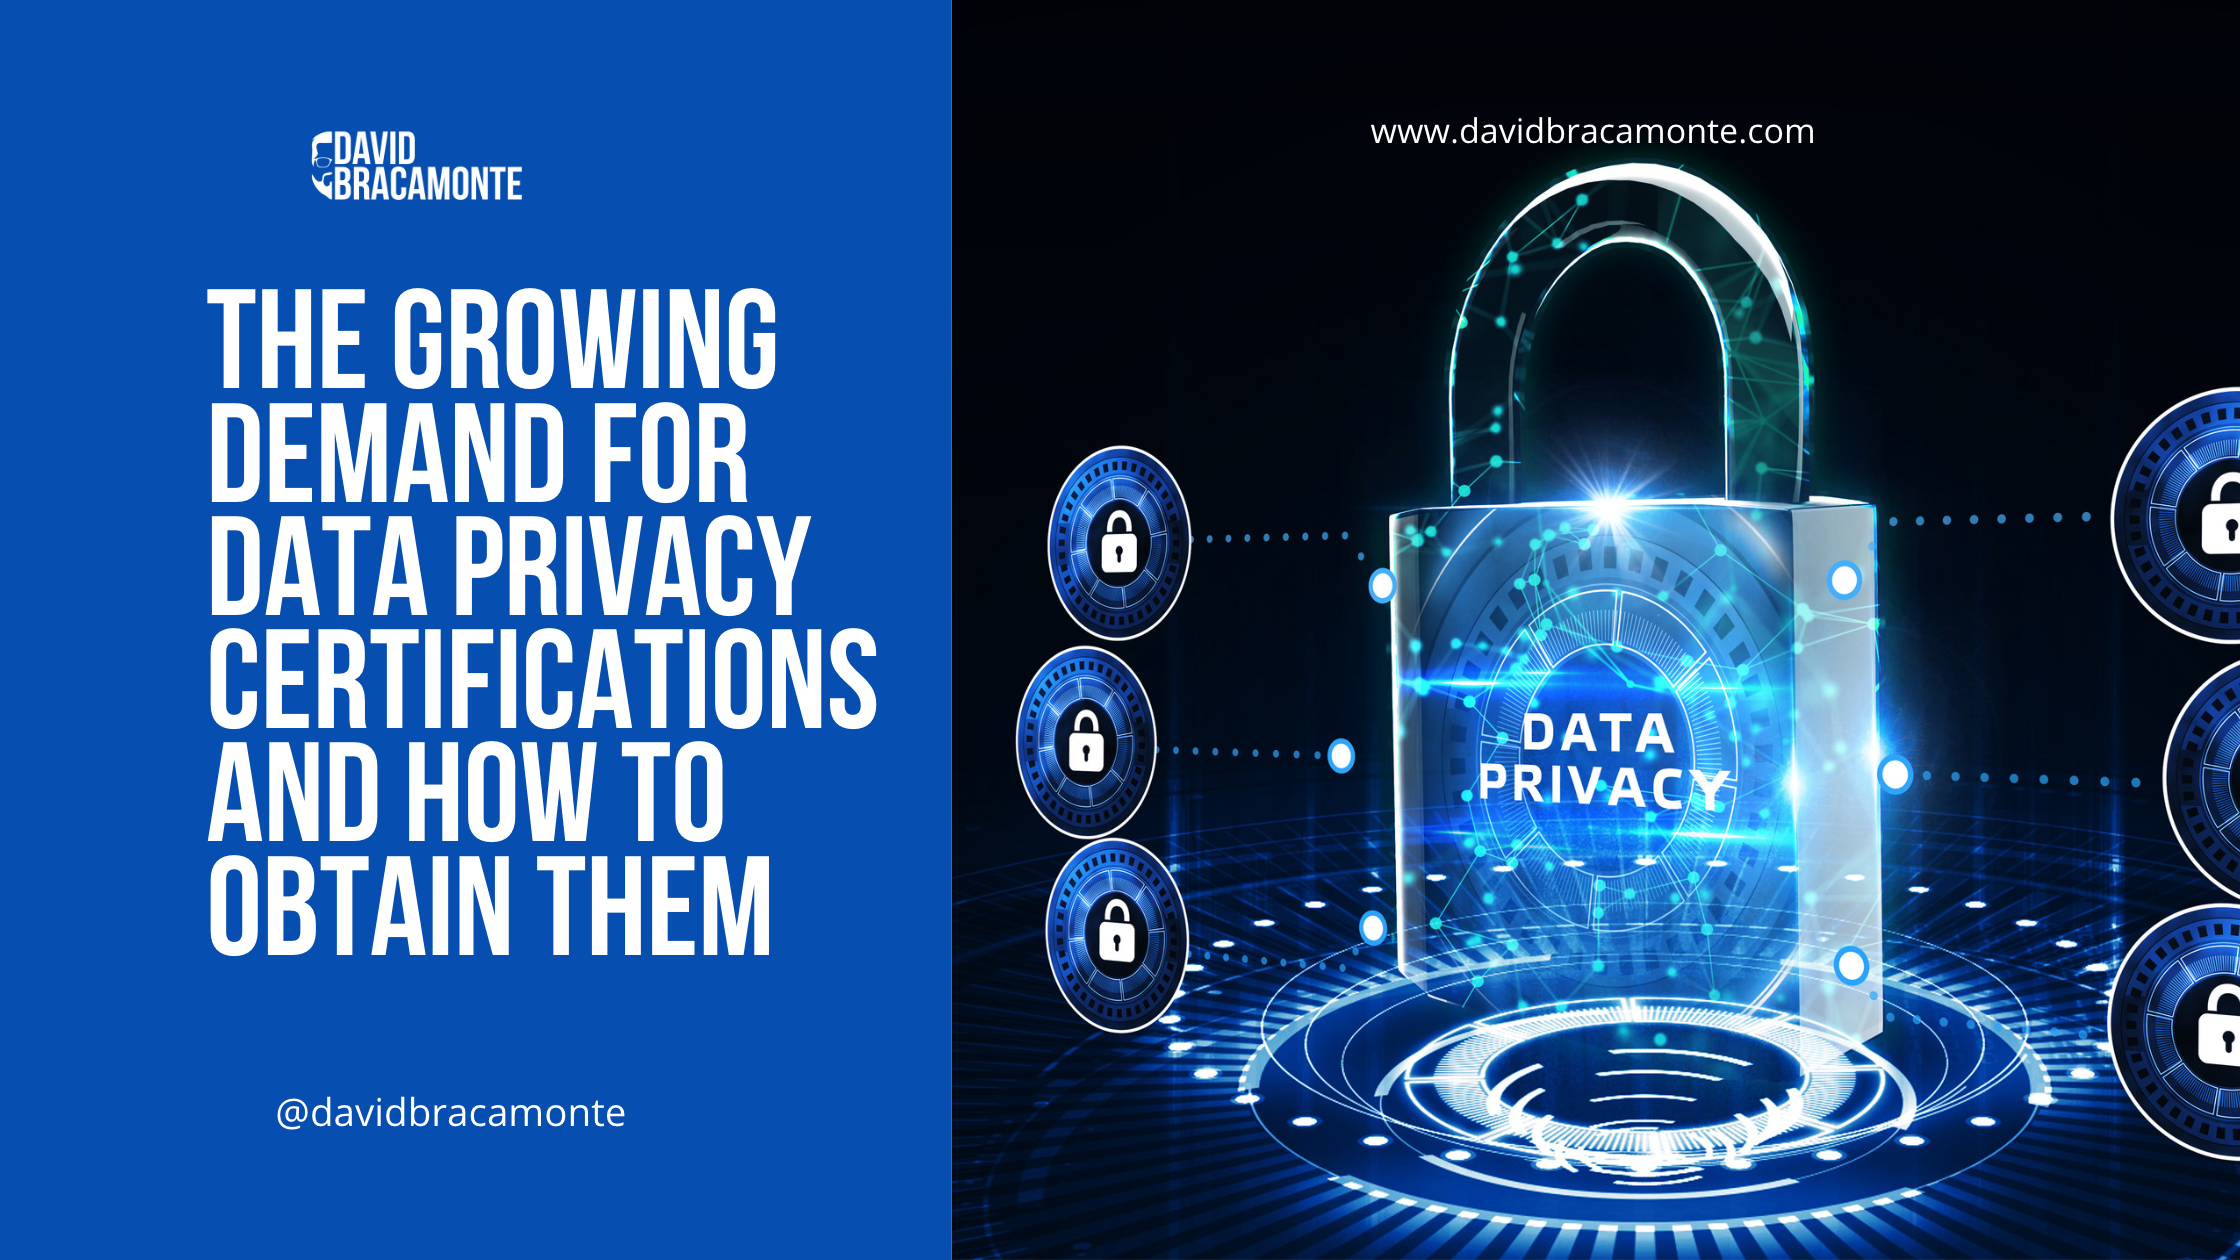 The growing demand for data privacy certifications and how to obtain